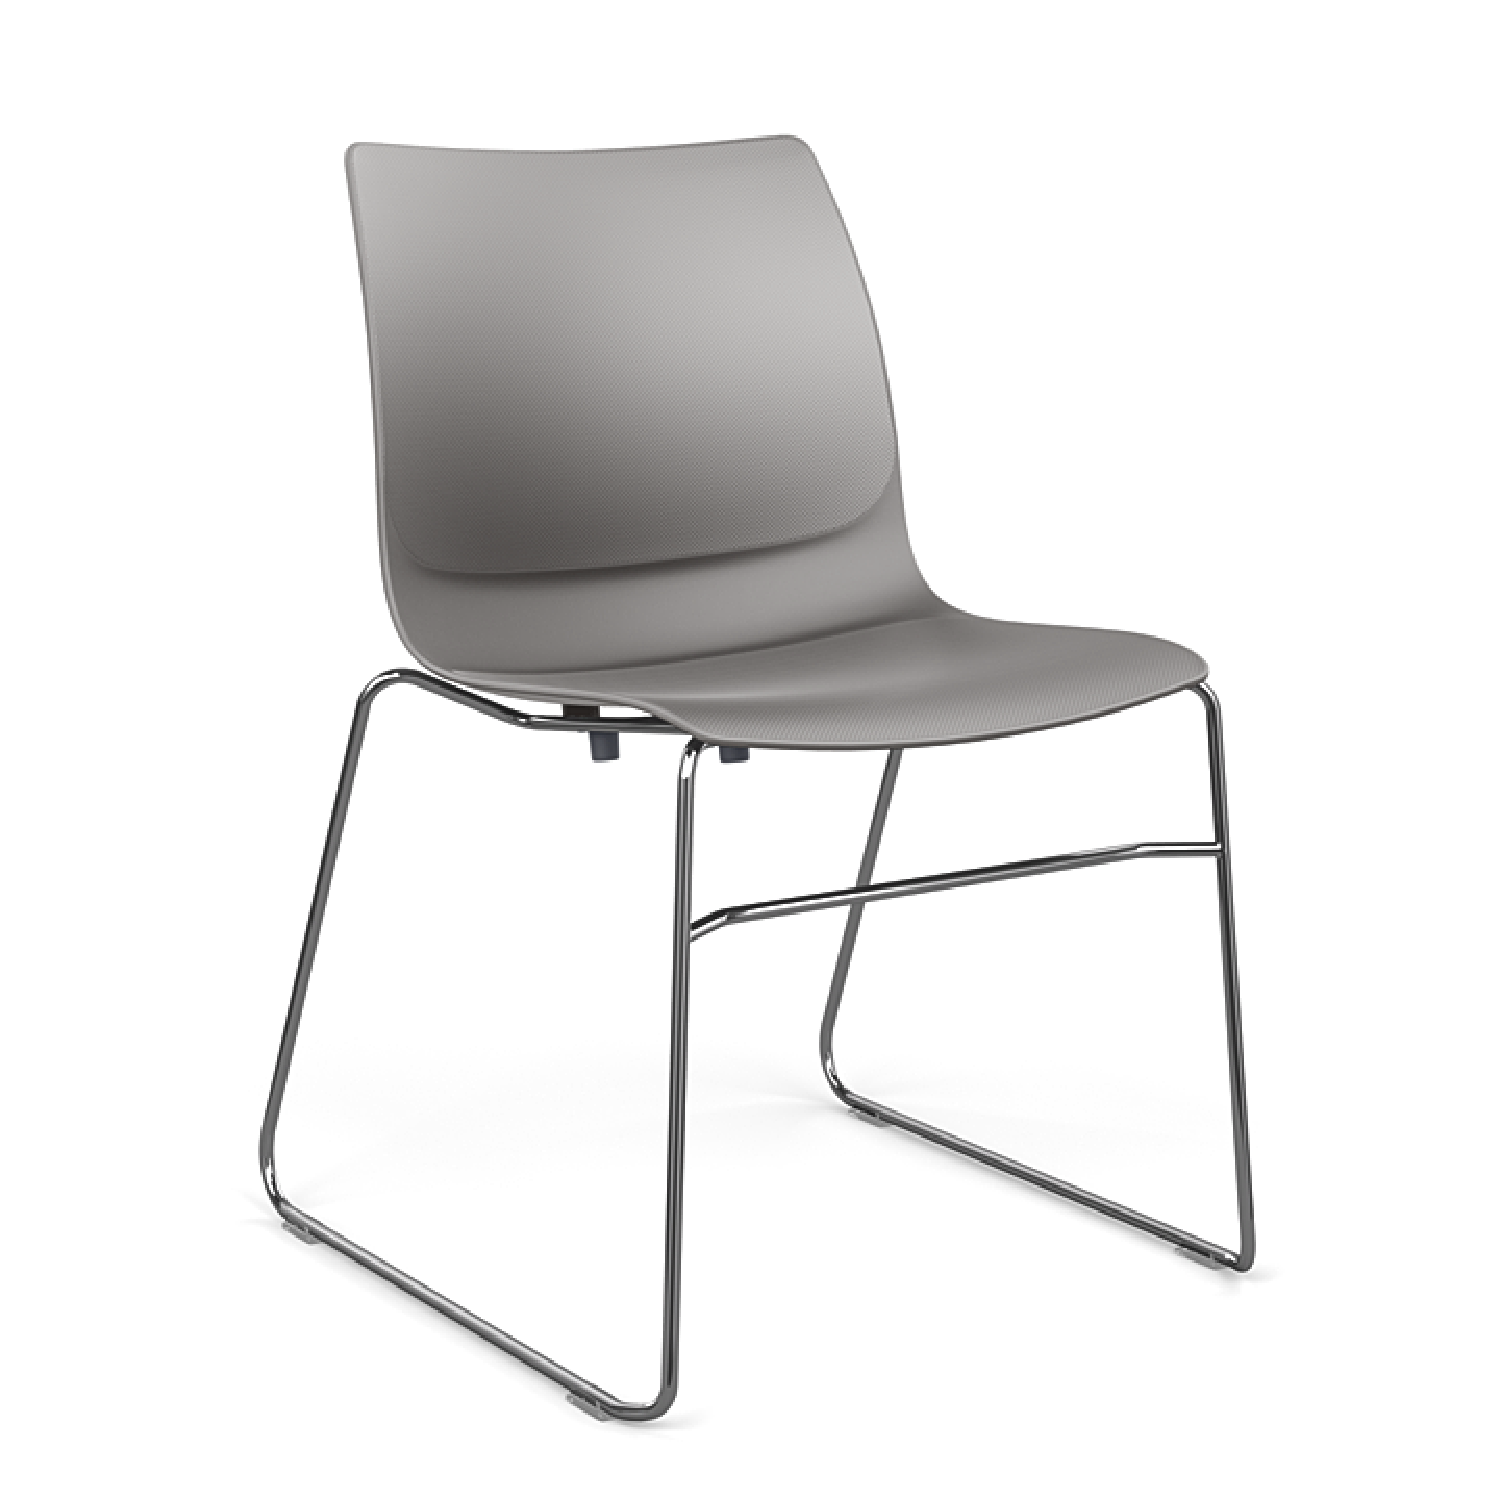 SitOnIt Baja Guest Chair